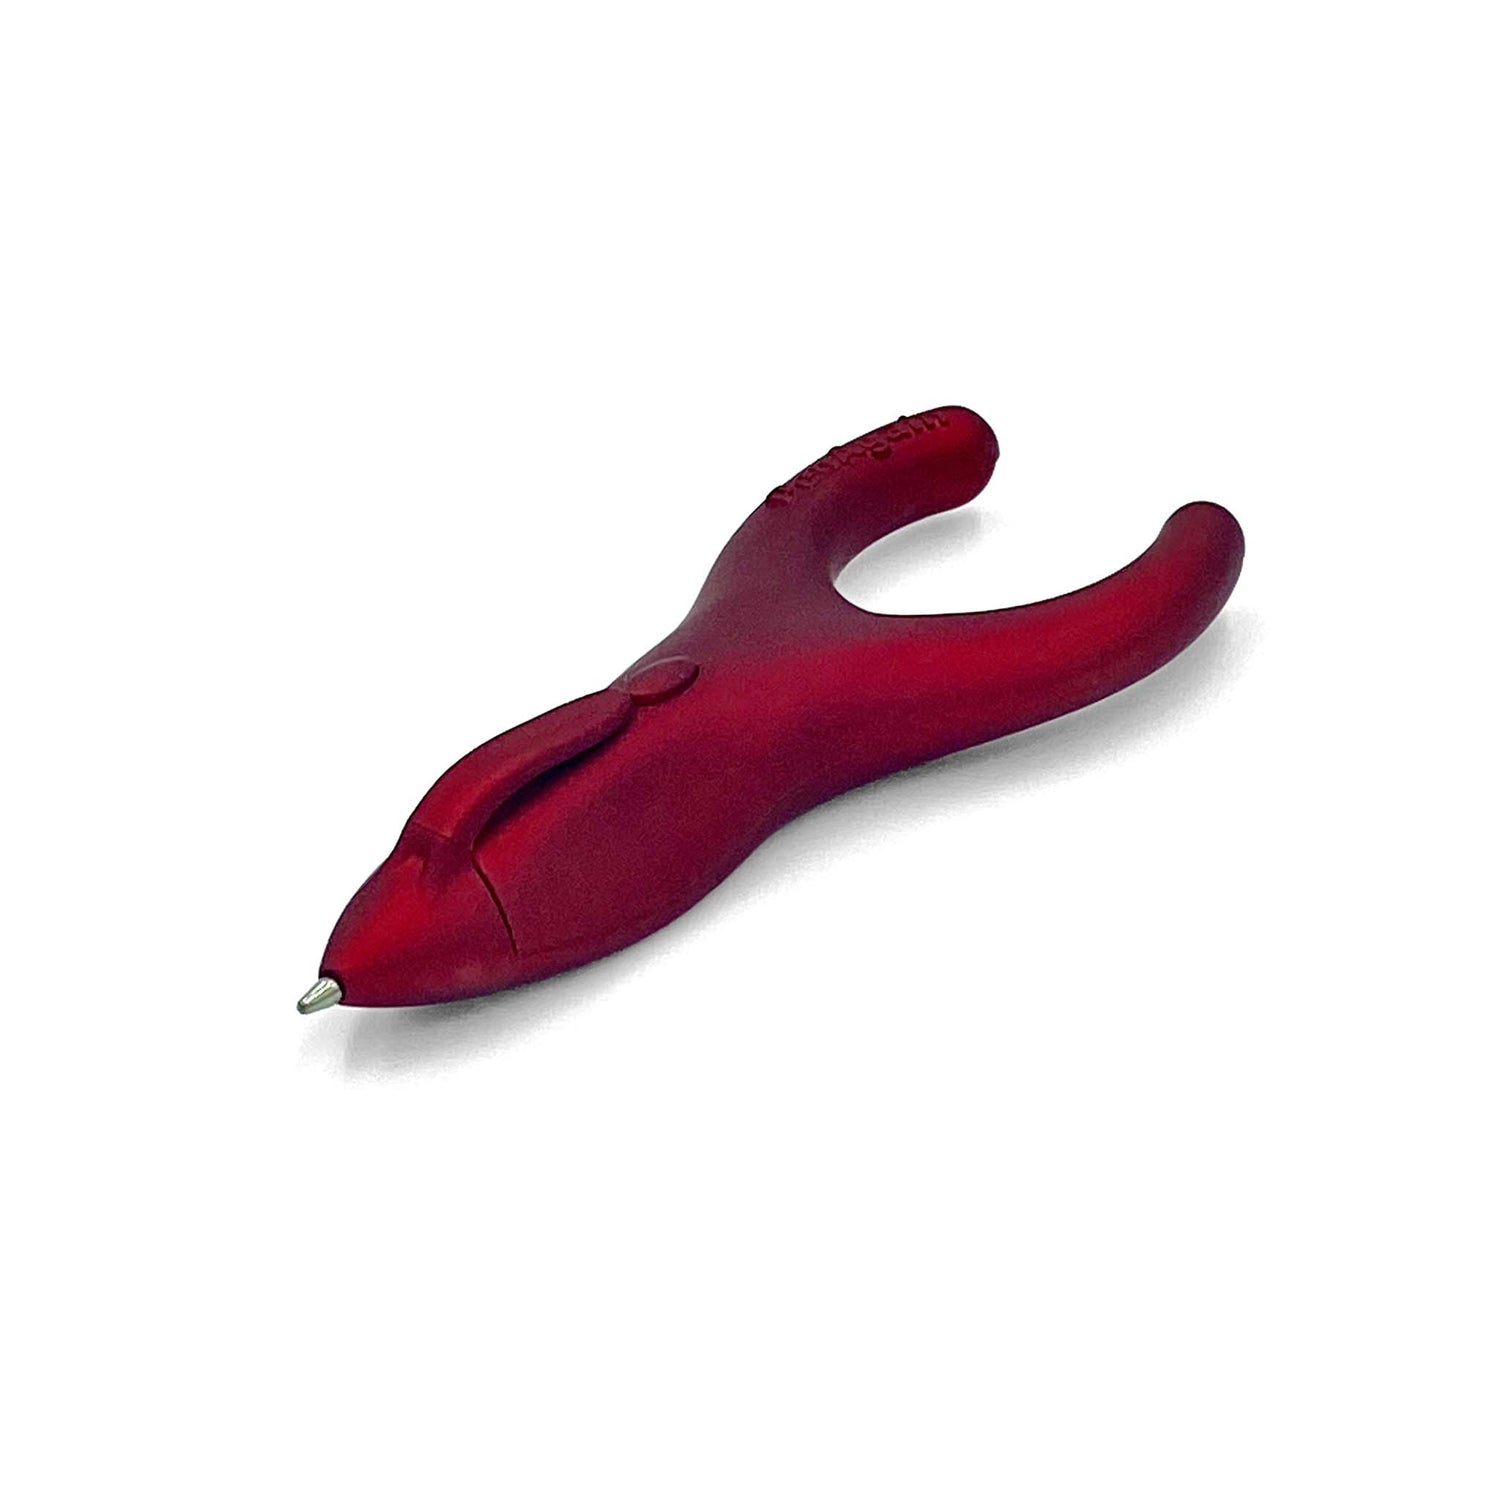 pen for arthritic hands back view